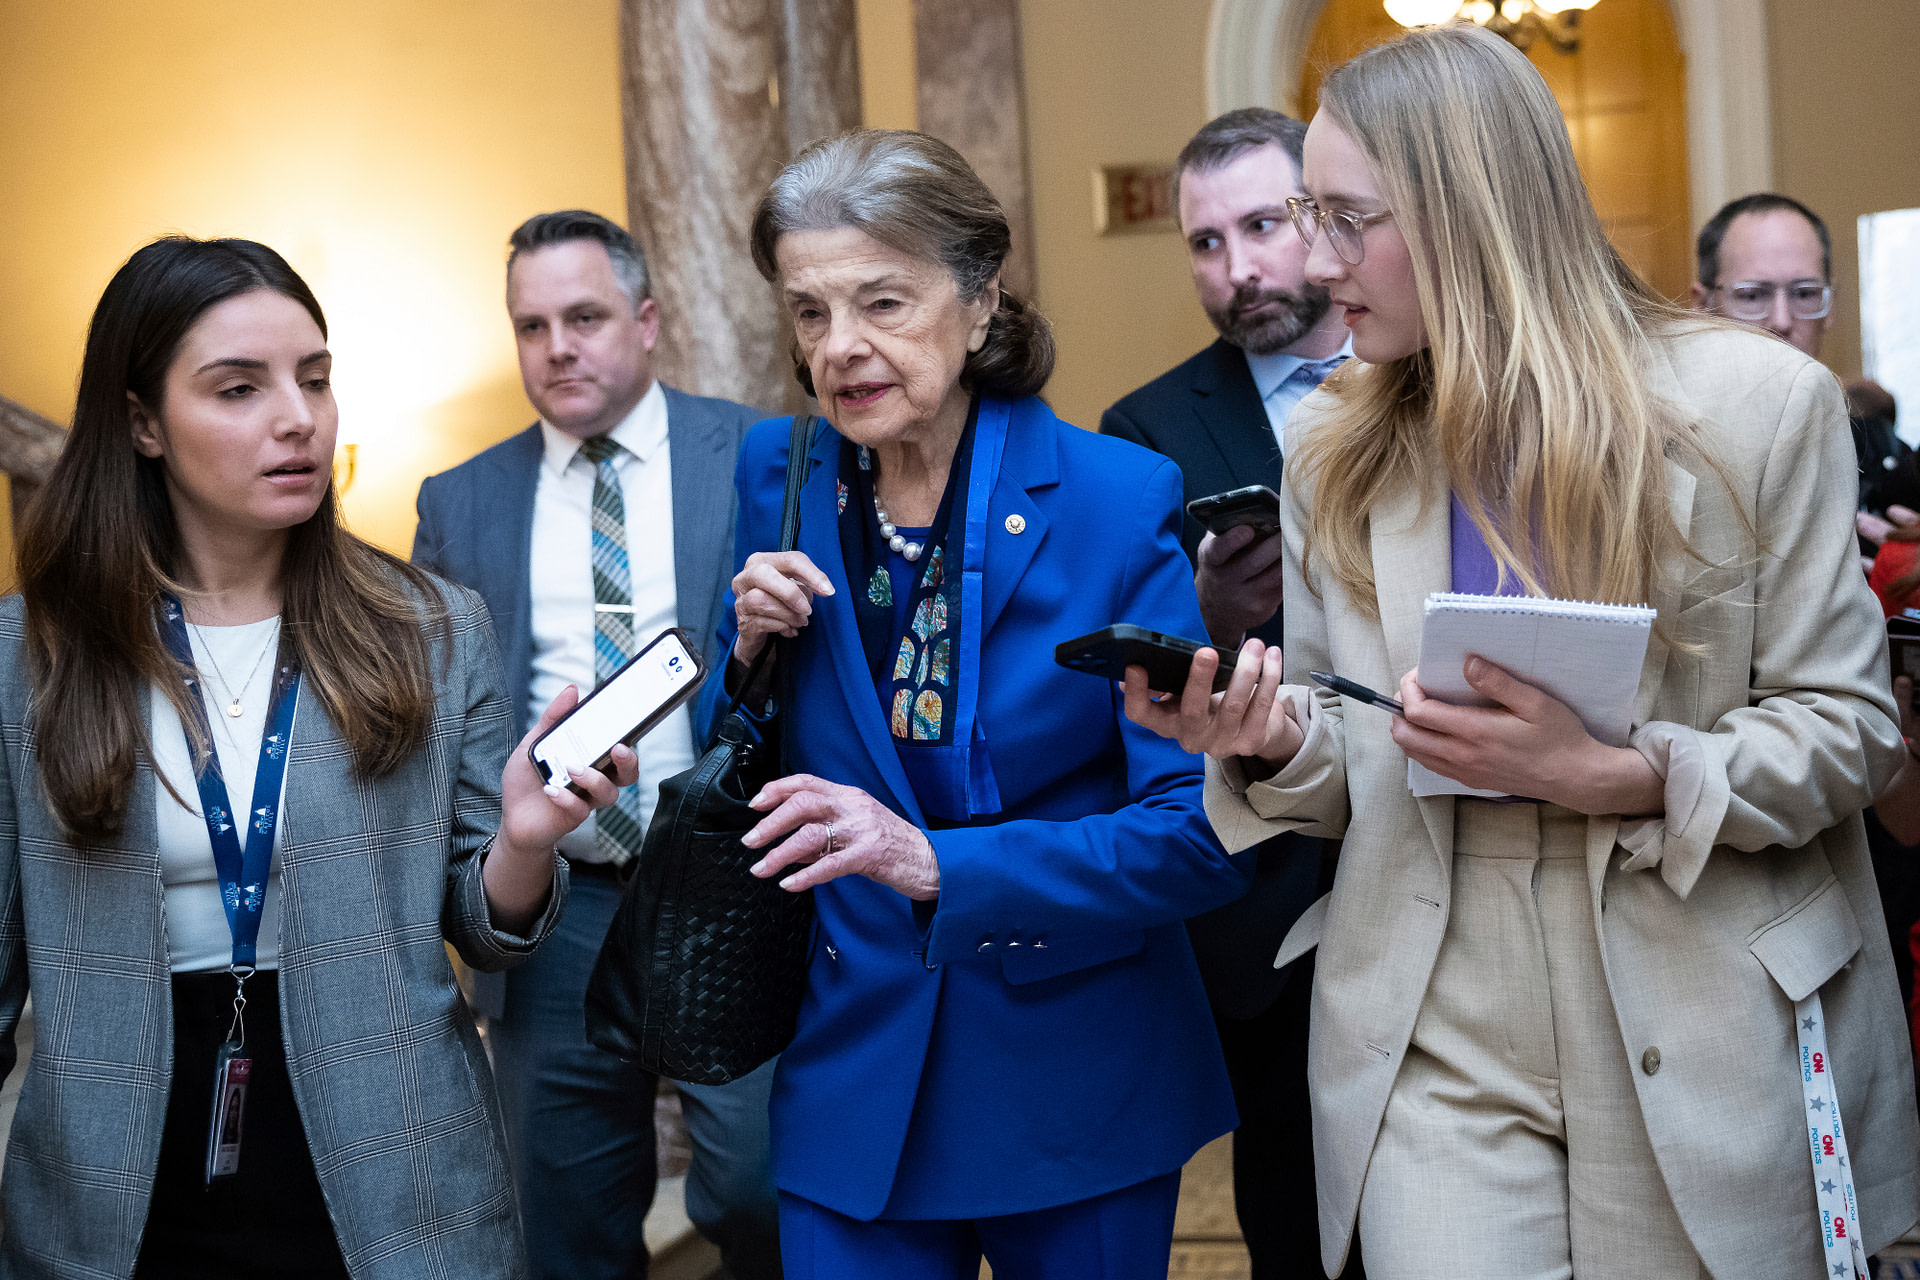 Feinstein is back, and so is the California Senate race